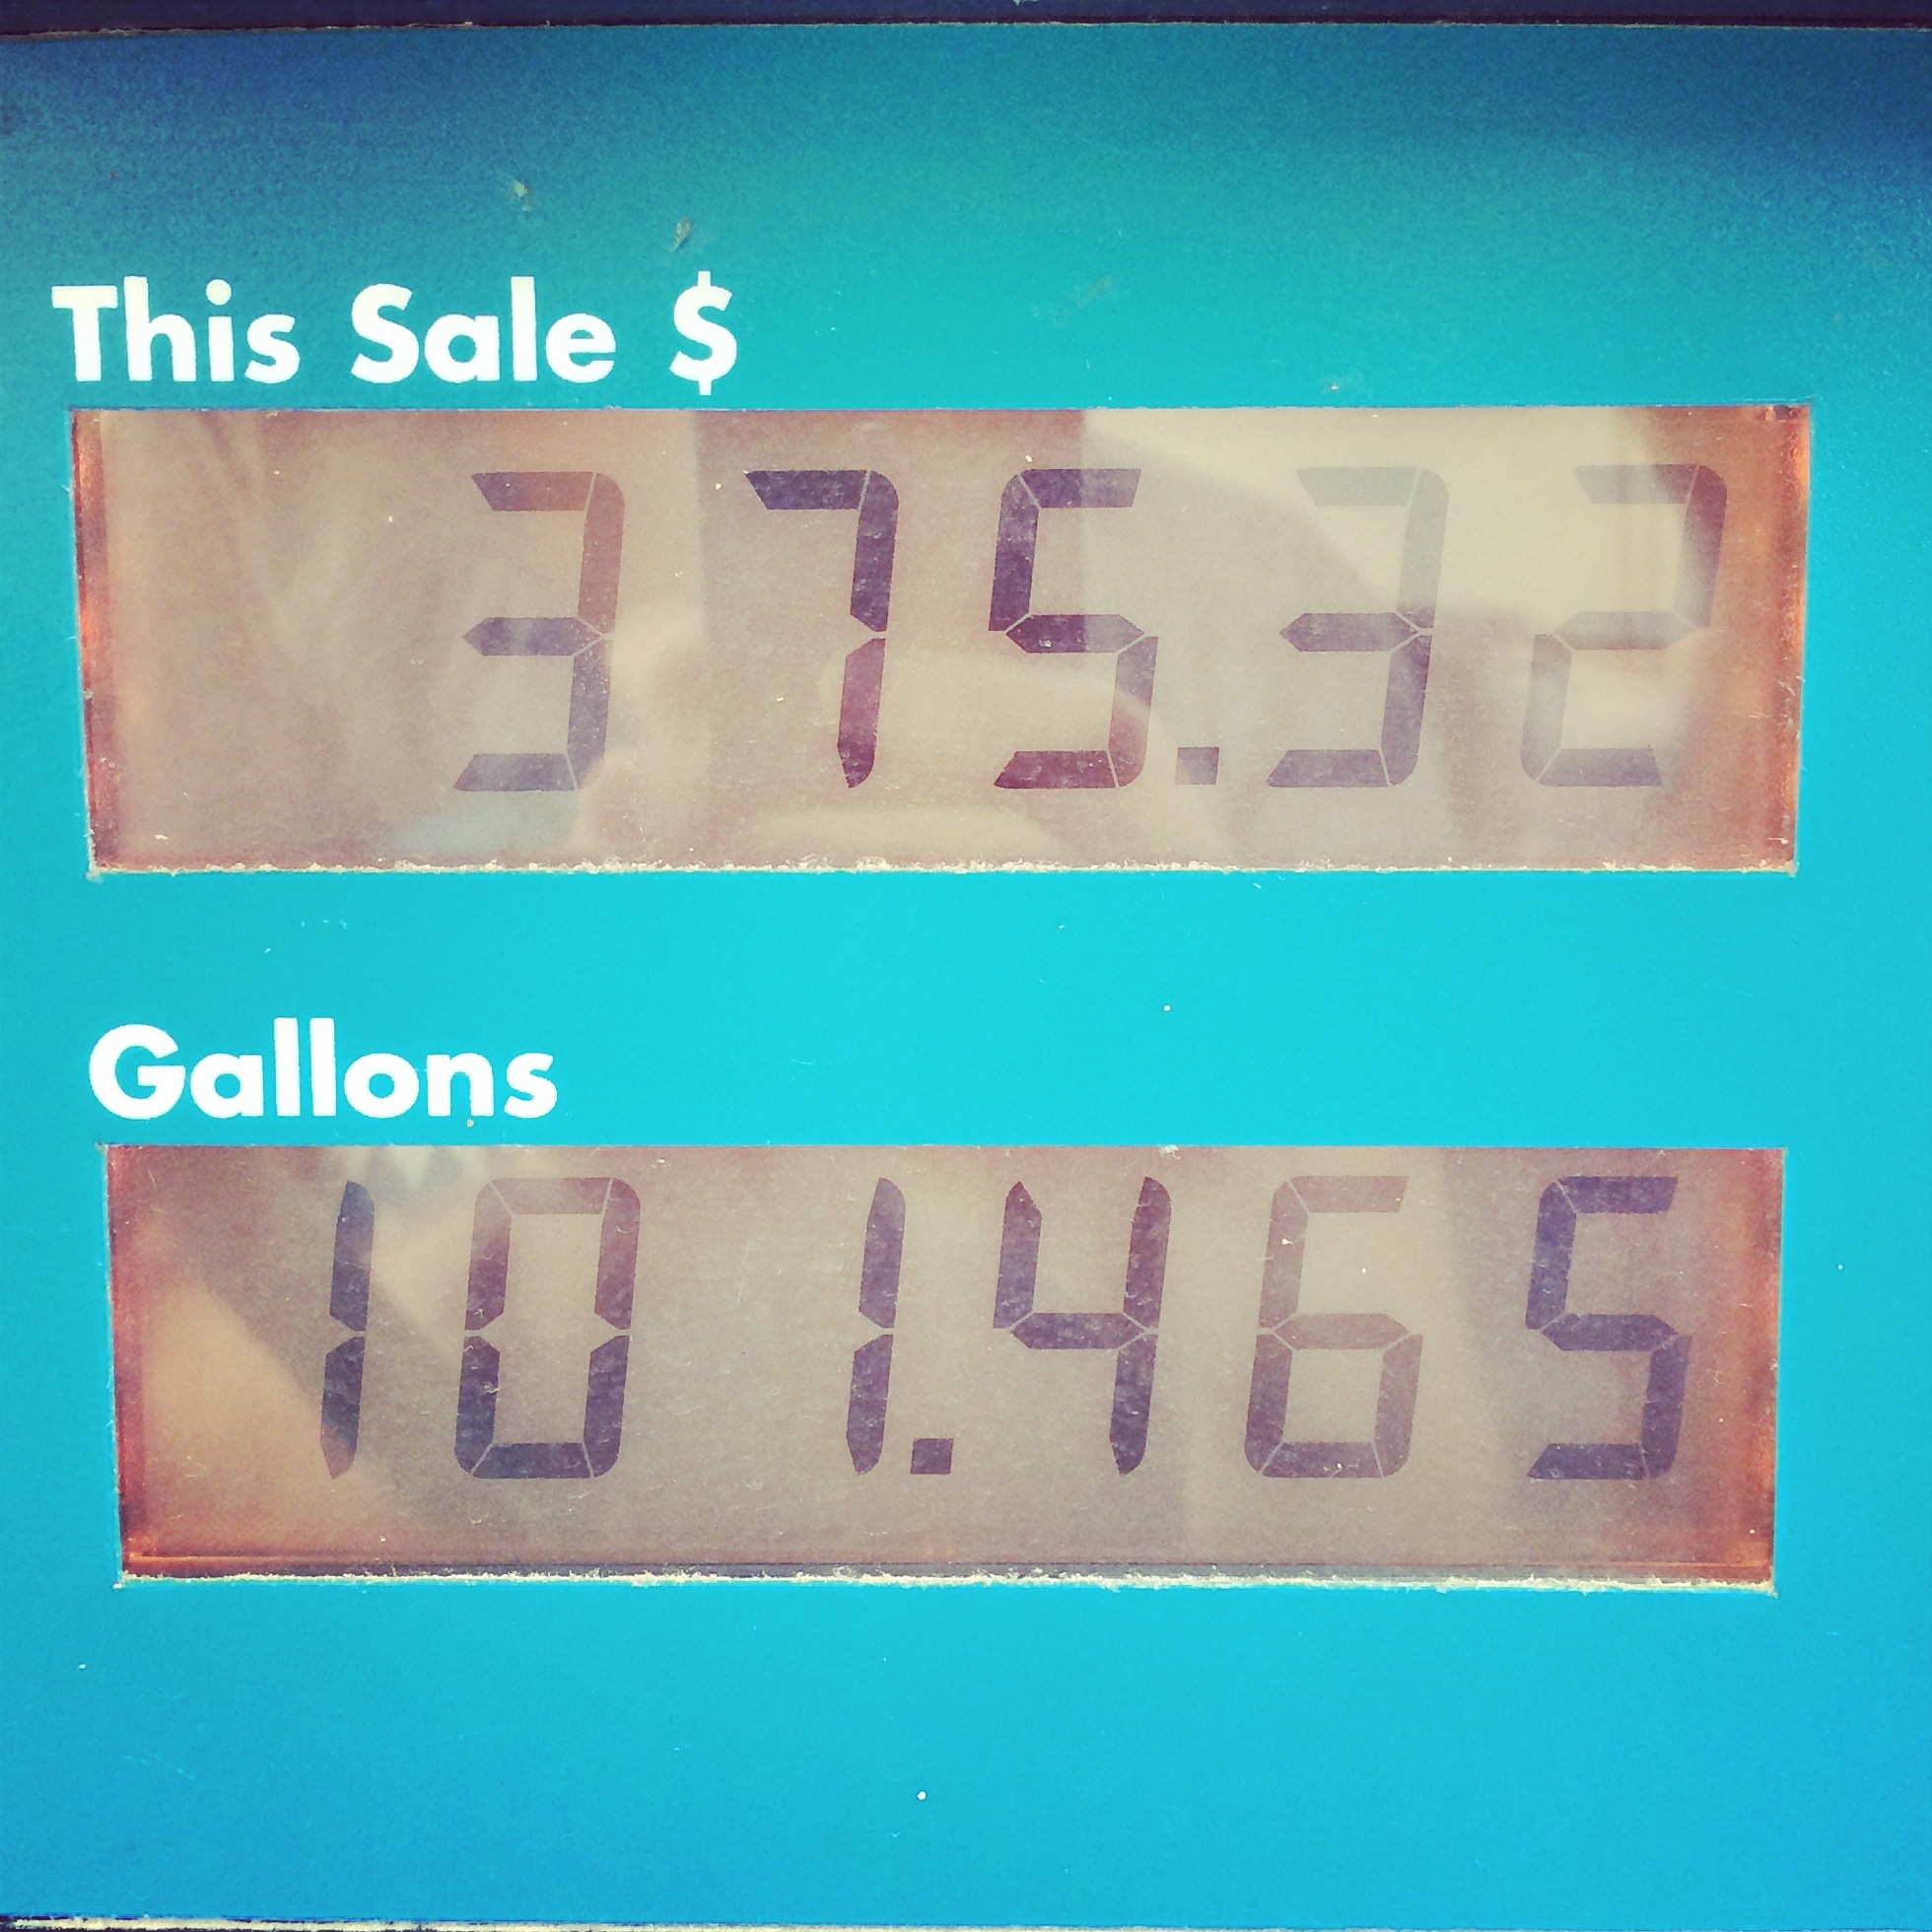 first time we filled the tank